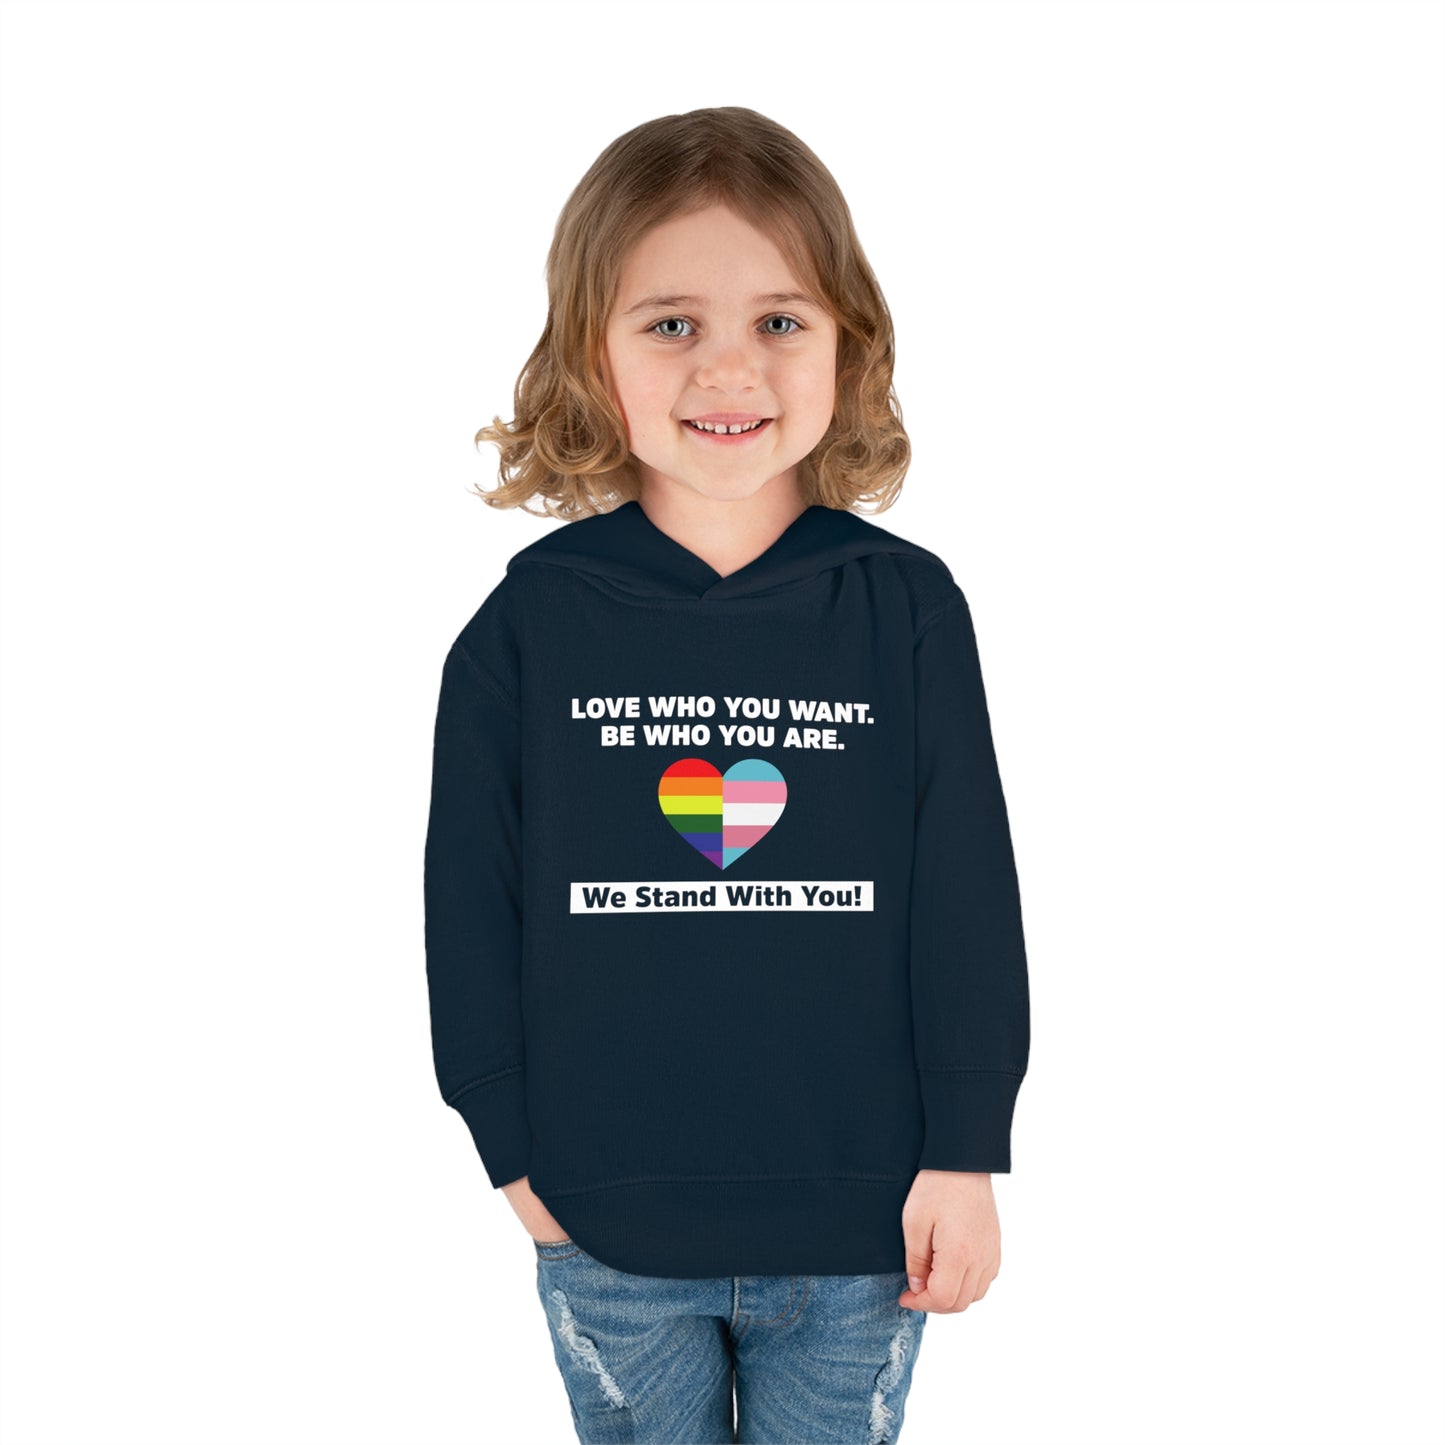 "Love Who You Want" Toddler Hoodie